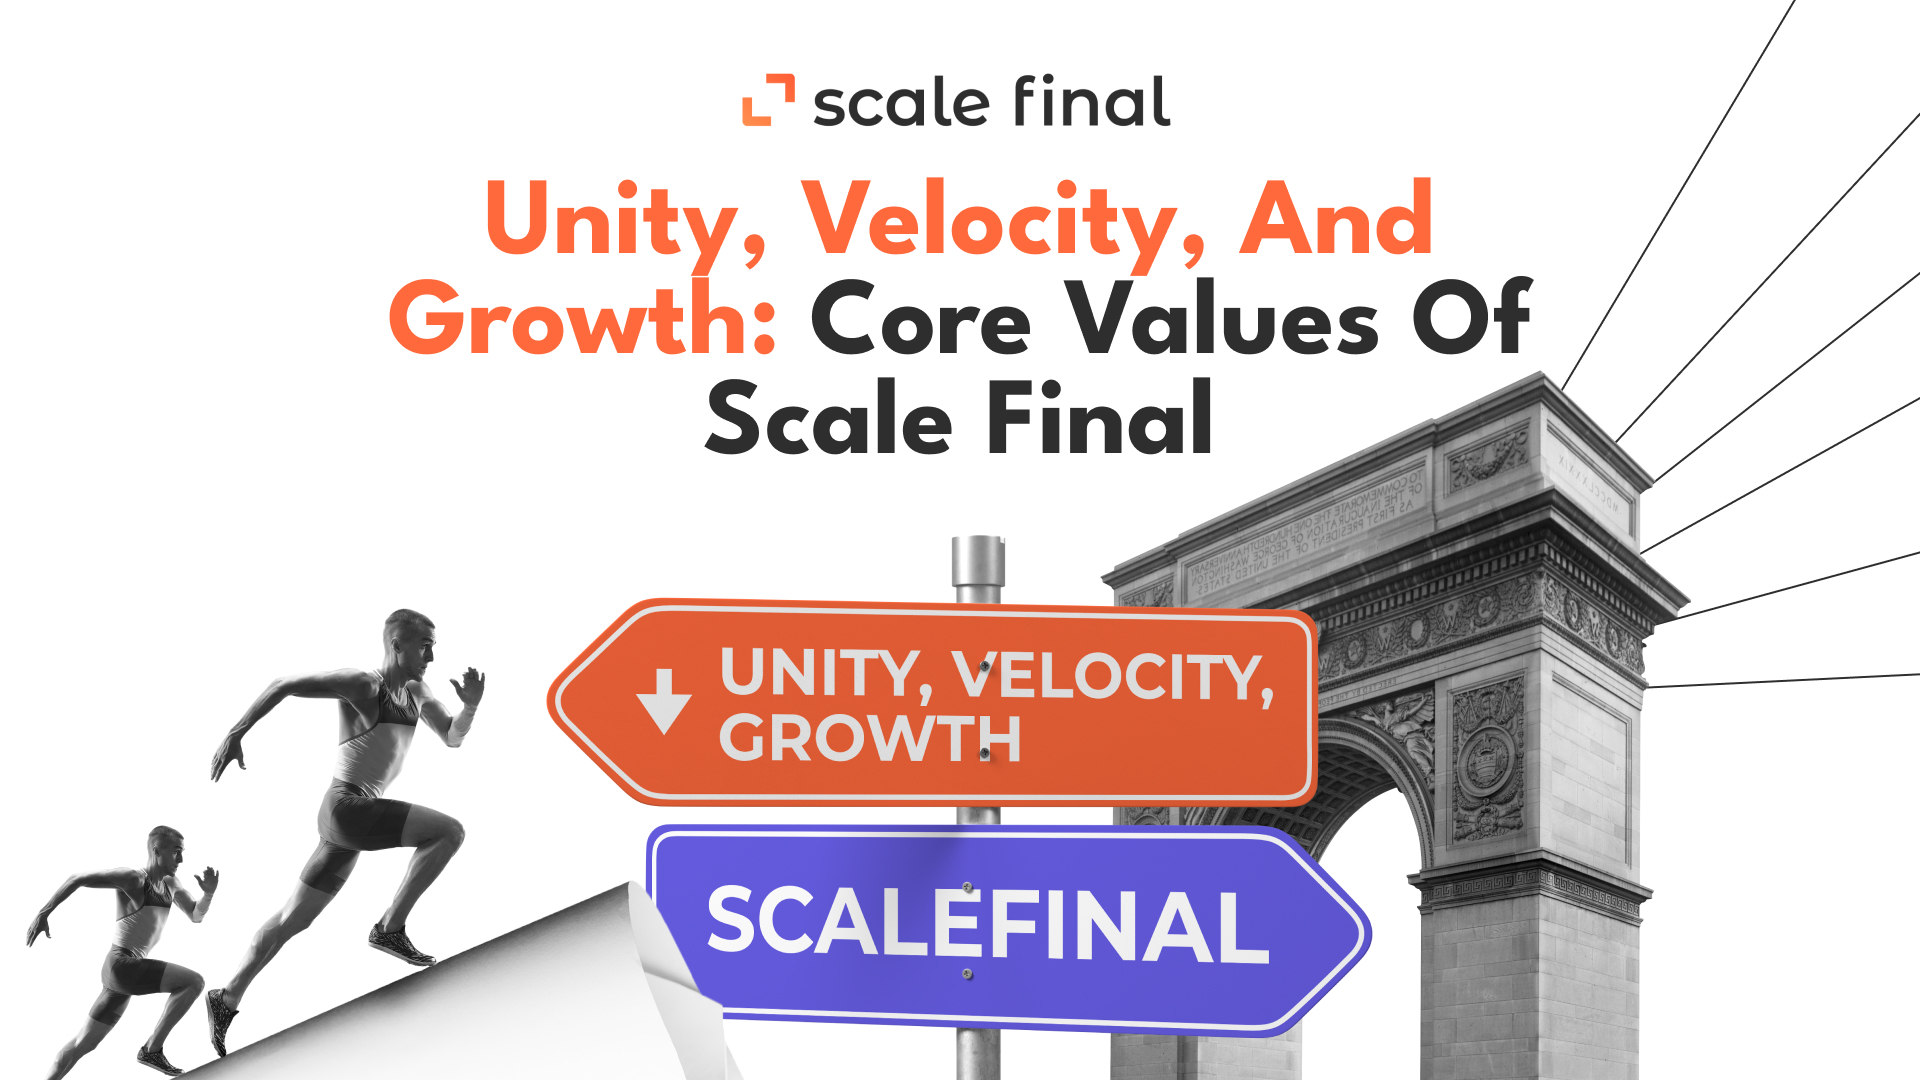 Unity, Velocity, and Growth: Core Values of Scale Final